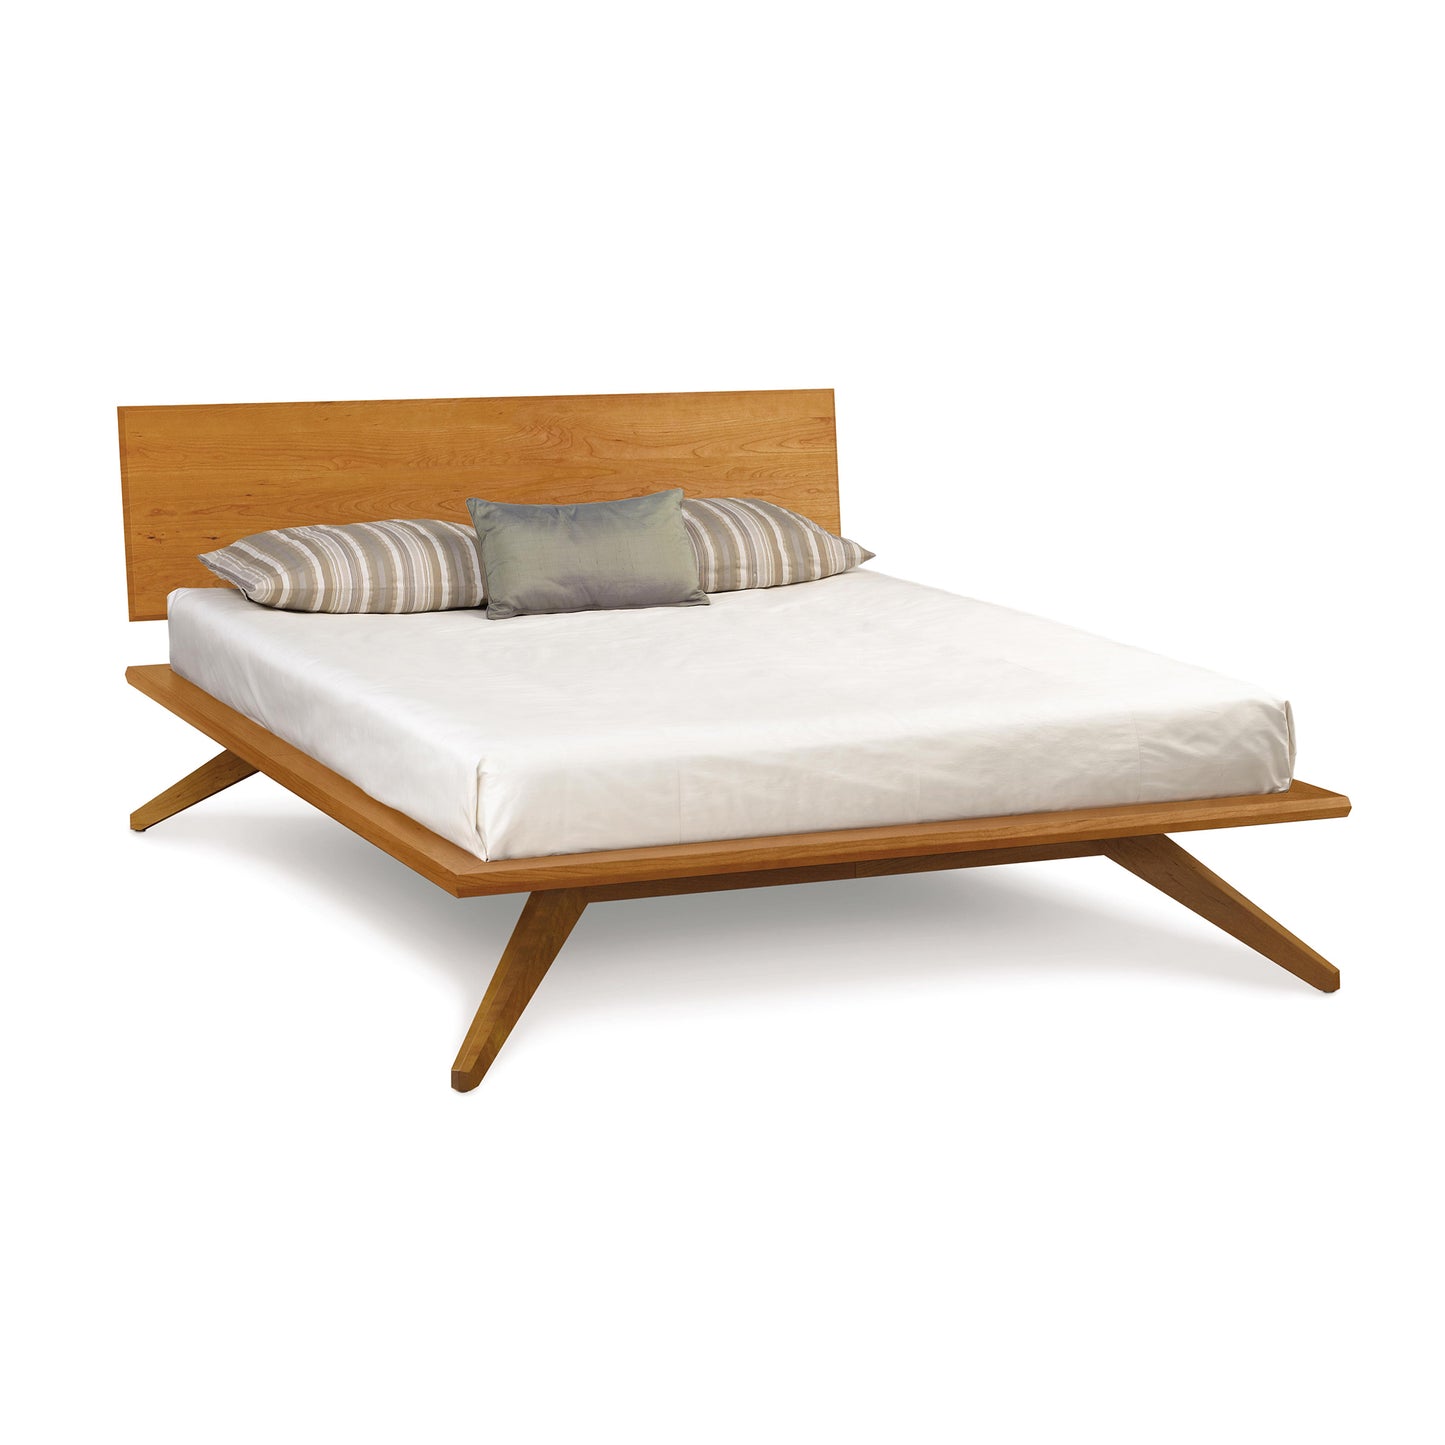 The Astrid Cherry Platform Bed by Copeland Furniture showcases a mid-century modern American design with its sustainably harvested solid cherry wood construction. This eco-friendly bed features a wooden headboard and footboard.